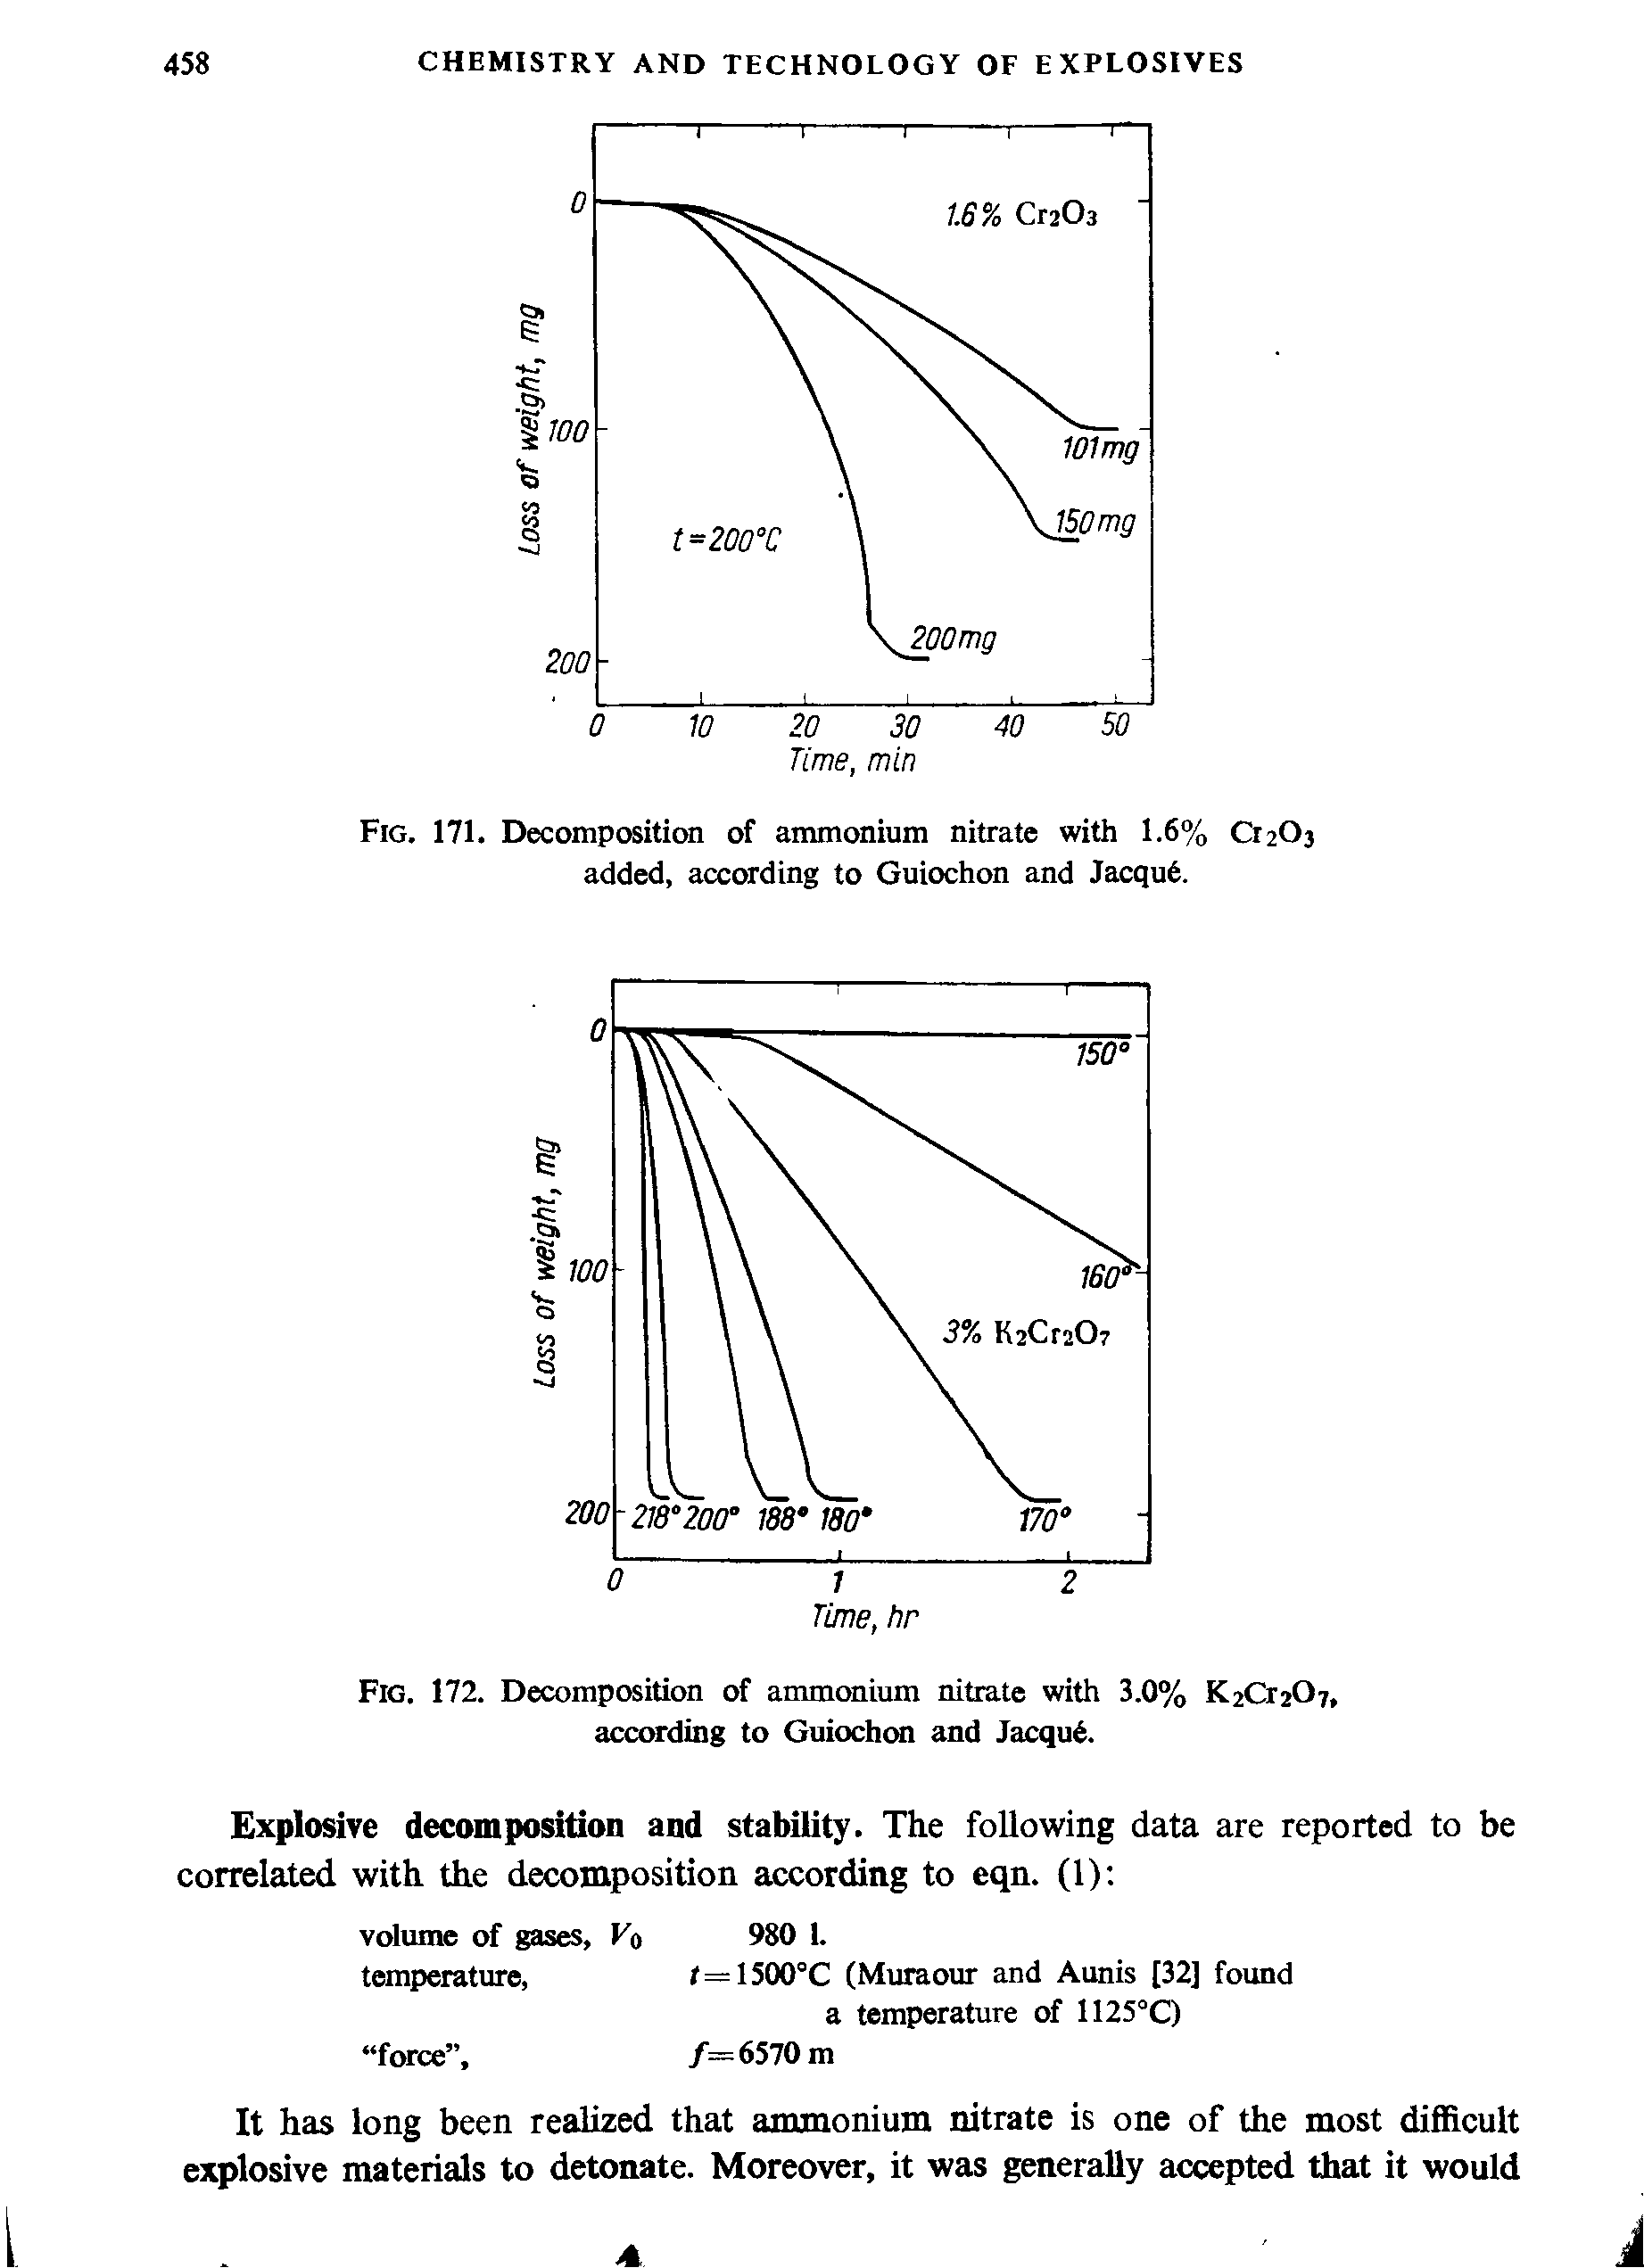 Fig. 171. Decomposition of ammonium nitrate with 1.6% O2O3 added, according to Guiochon and Jacqu6.